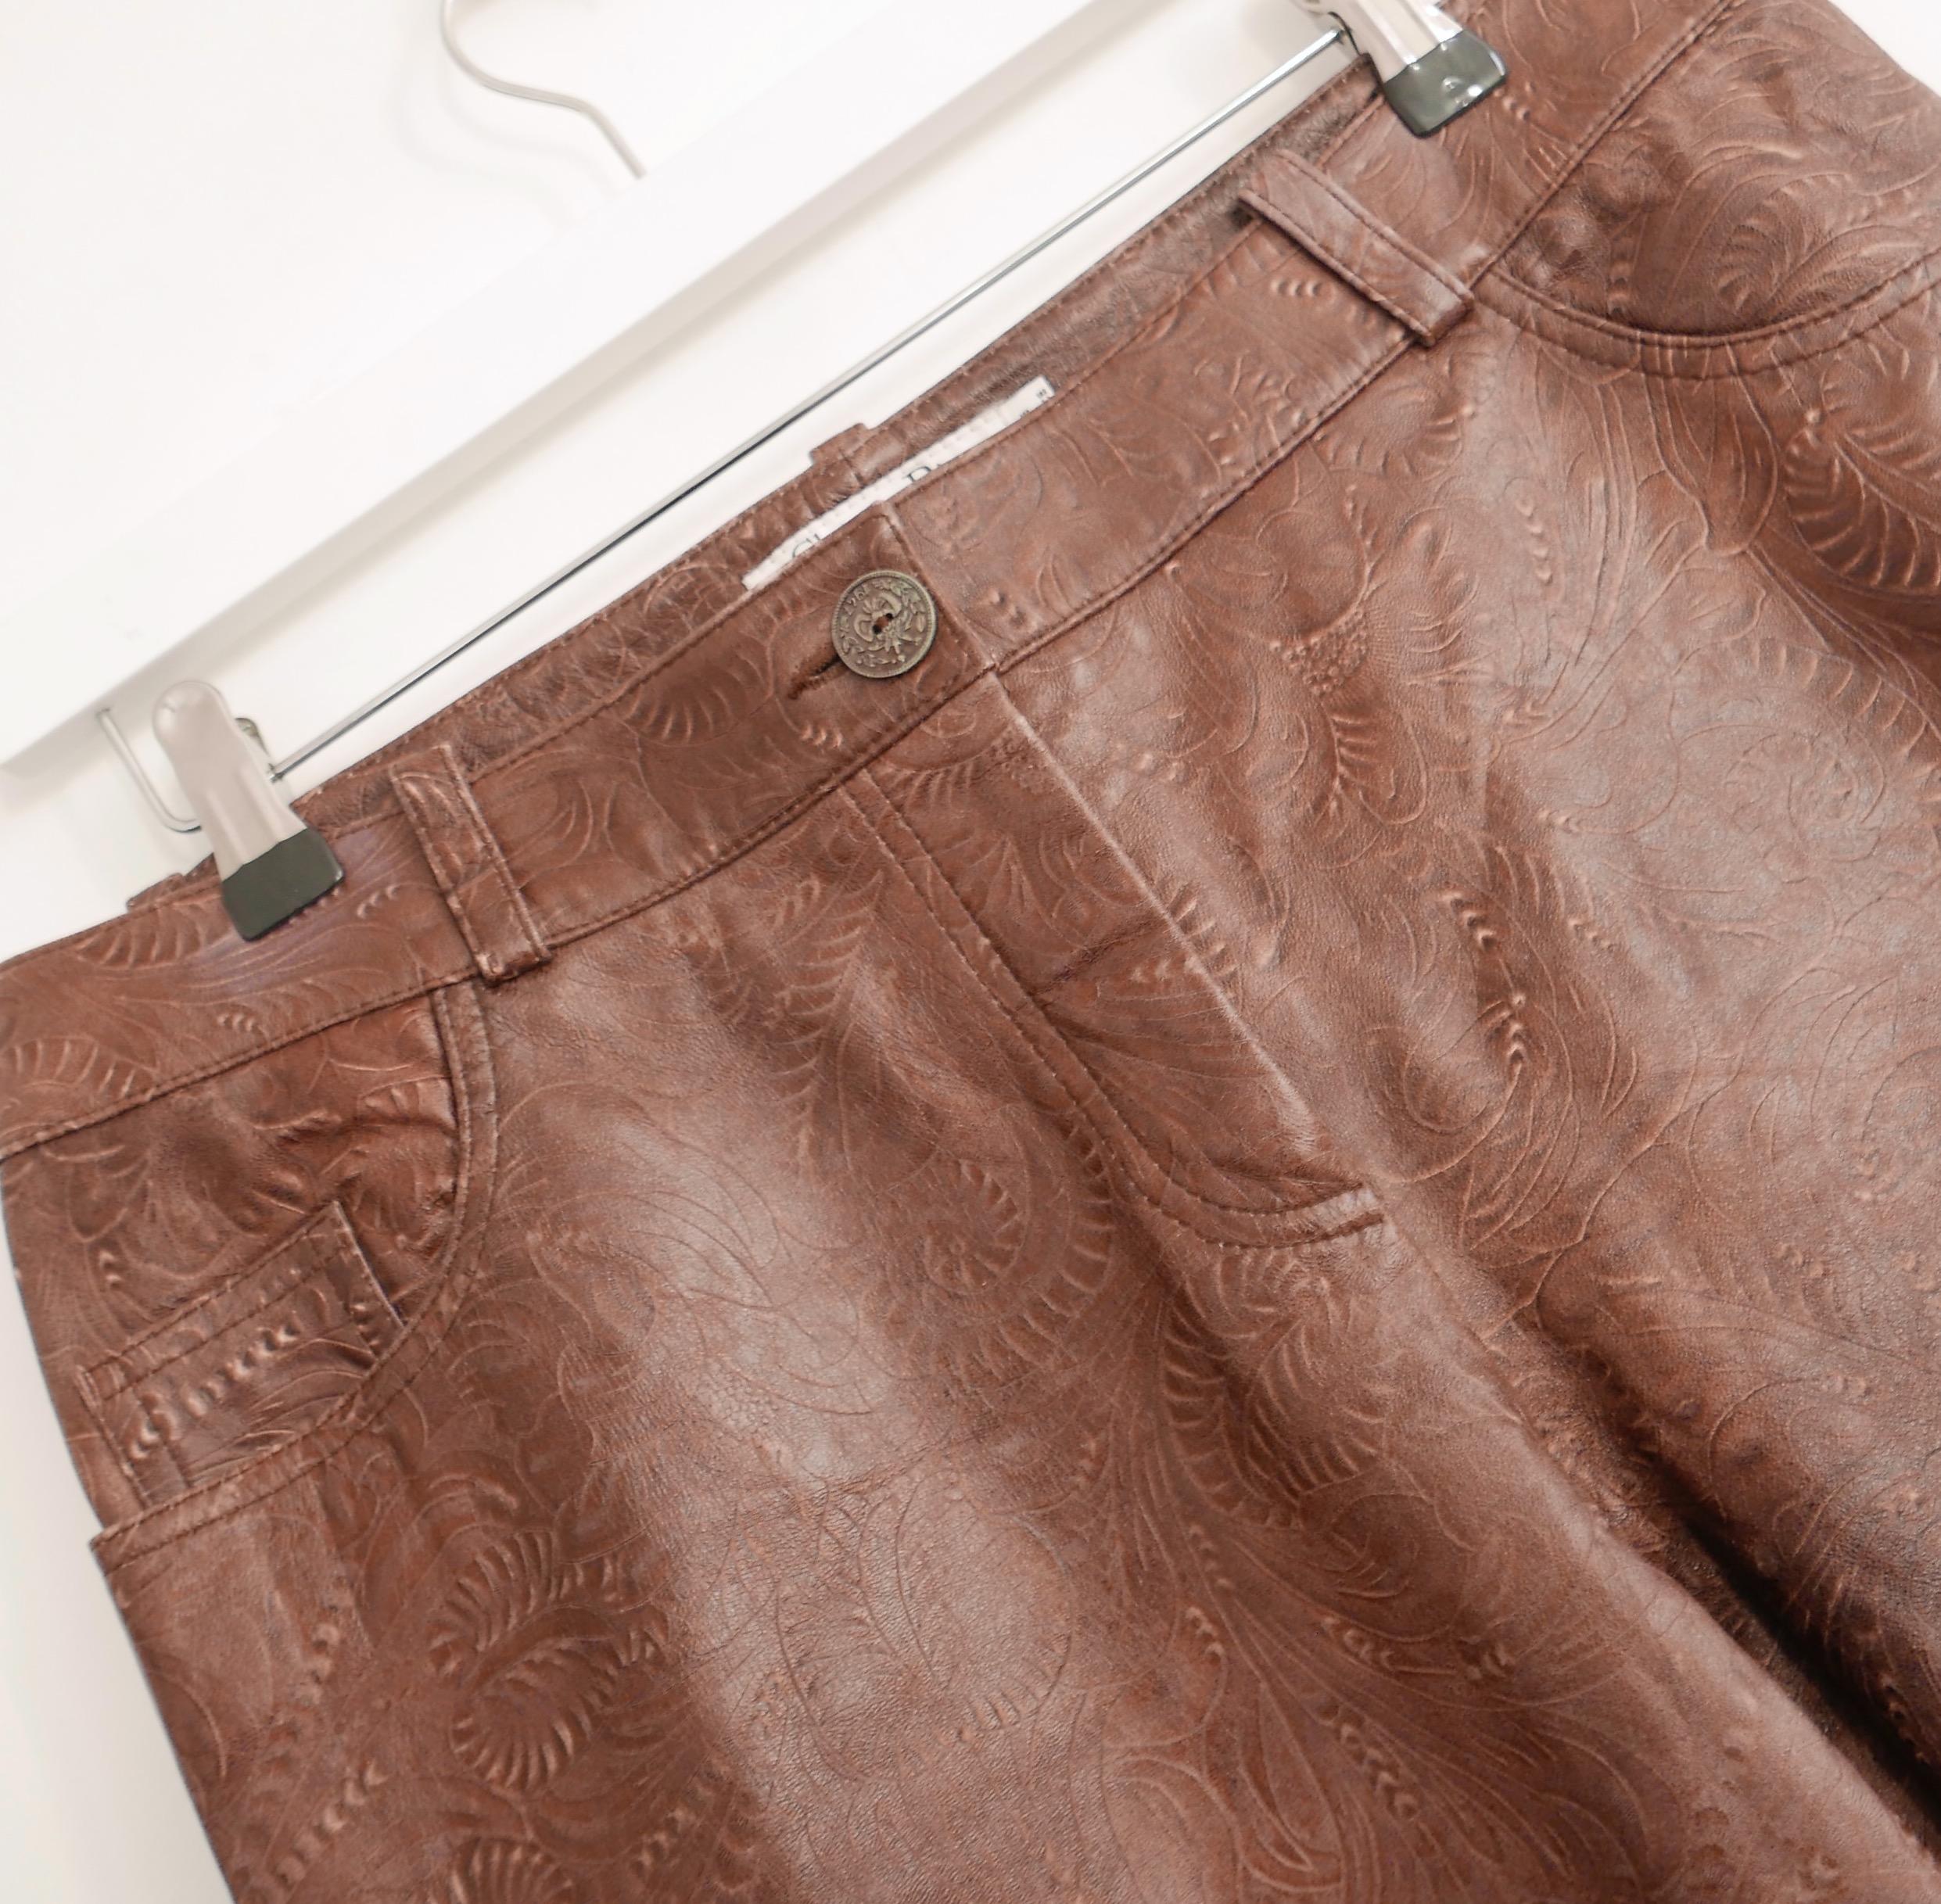 Rarest Christian Dior x Galliano leather trousers from the Spring 2006 collection. In amazing unworn with tag/spare button condition. Made from Western inspired, fully tooled brown leather with embroidered back pockets and vintaged metal button to